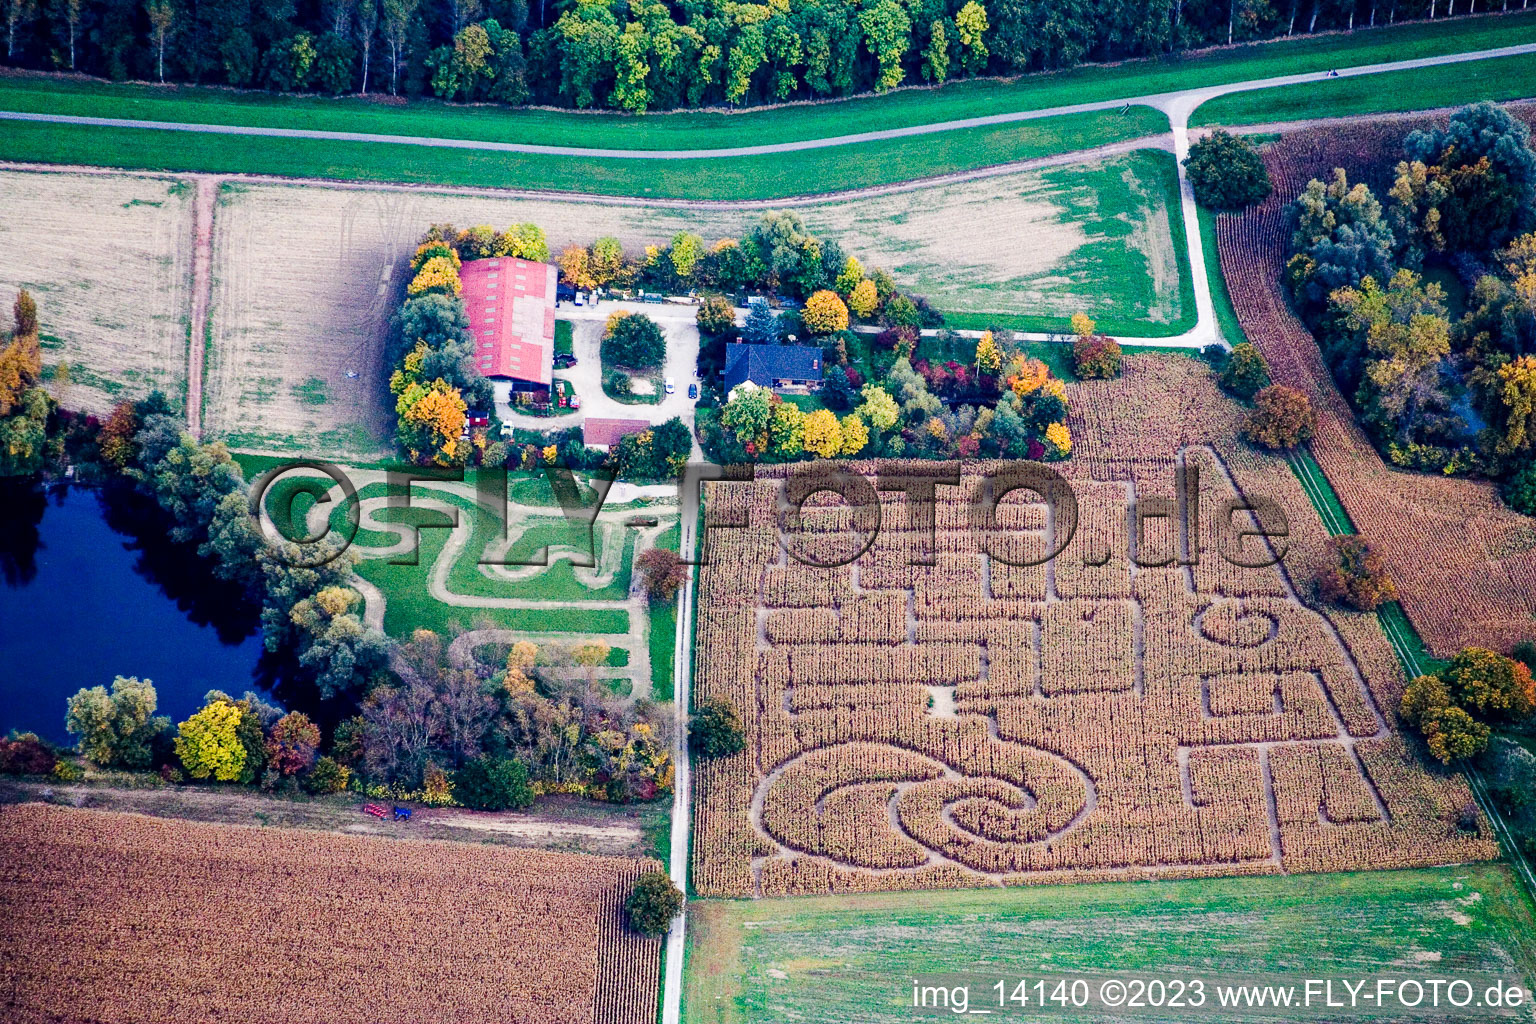 Aerial view of Corn maze in Leimersheim in the state Rhineland-Palatinate, Germany